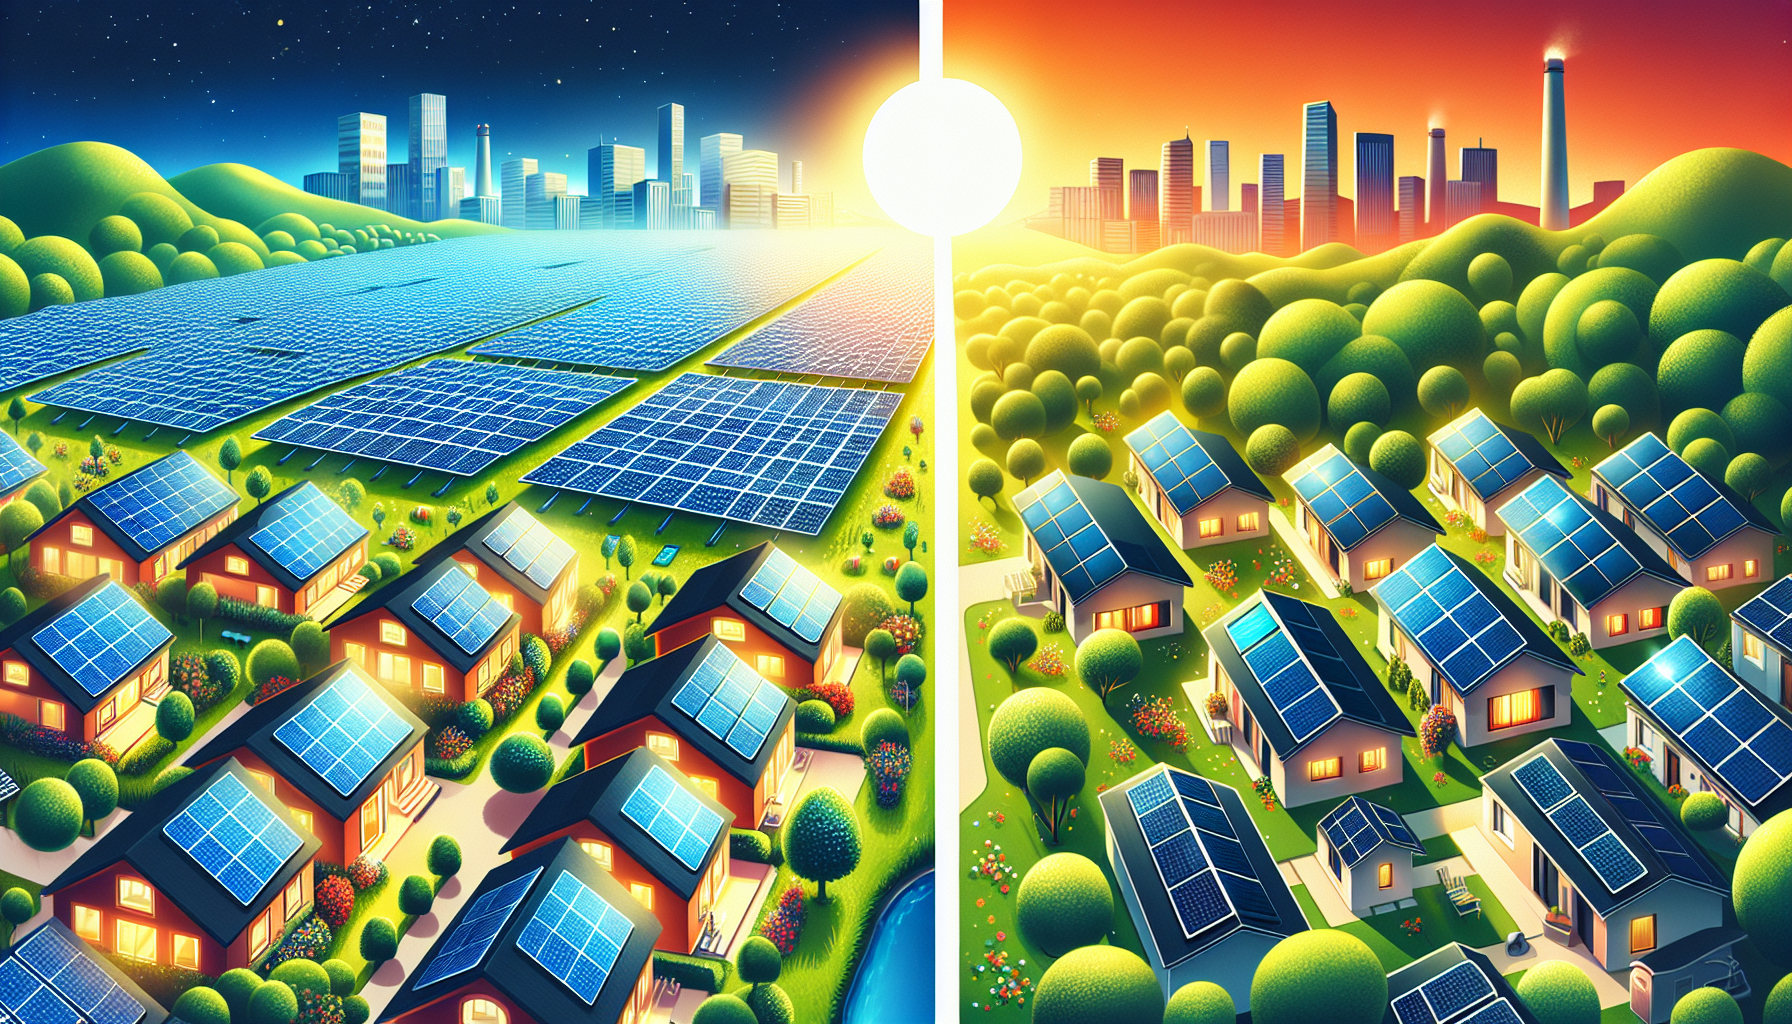 Deciding on Solar Energy? The Ultimate Guide to Community Solar vs Rooftop Solar